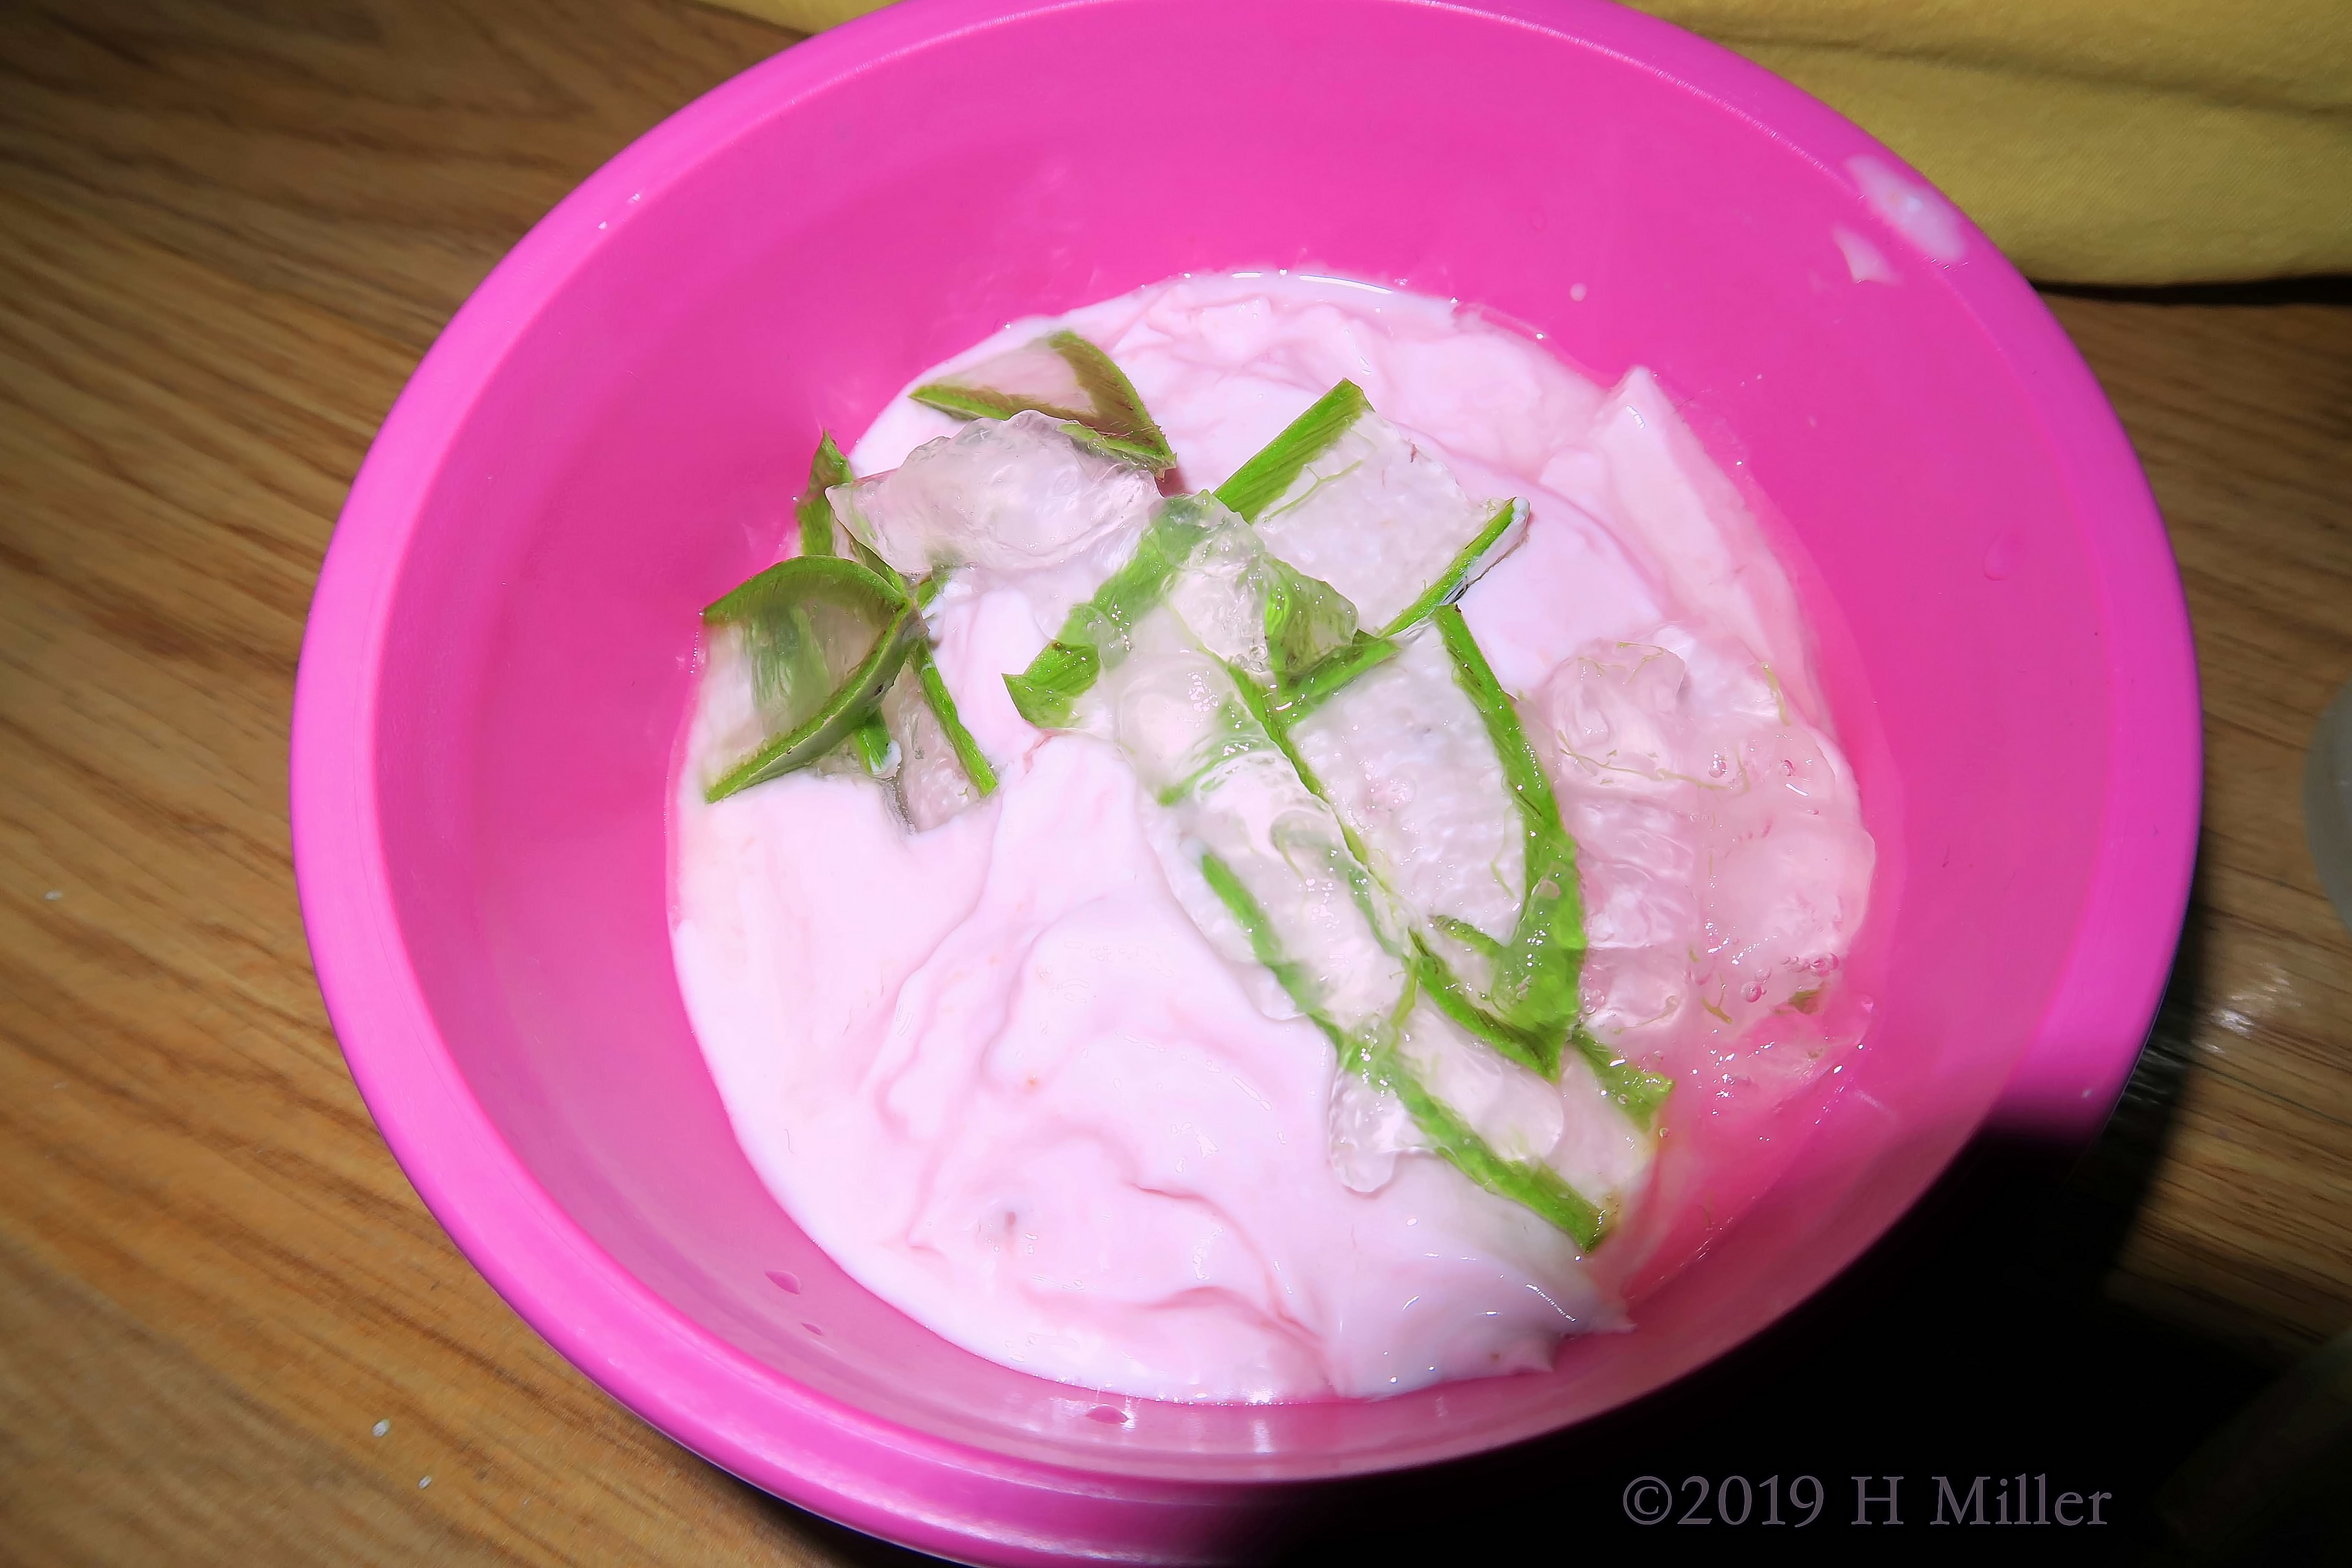 Facial Masque With Aloe Pieces And Strawberry In A Pink Bowl 